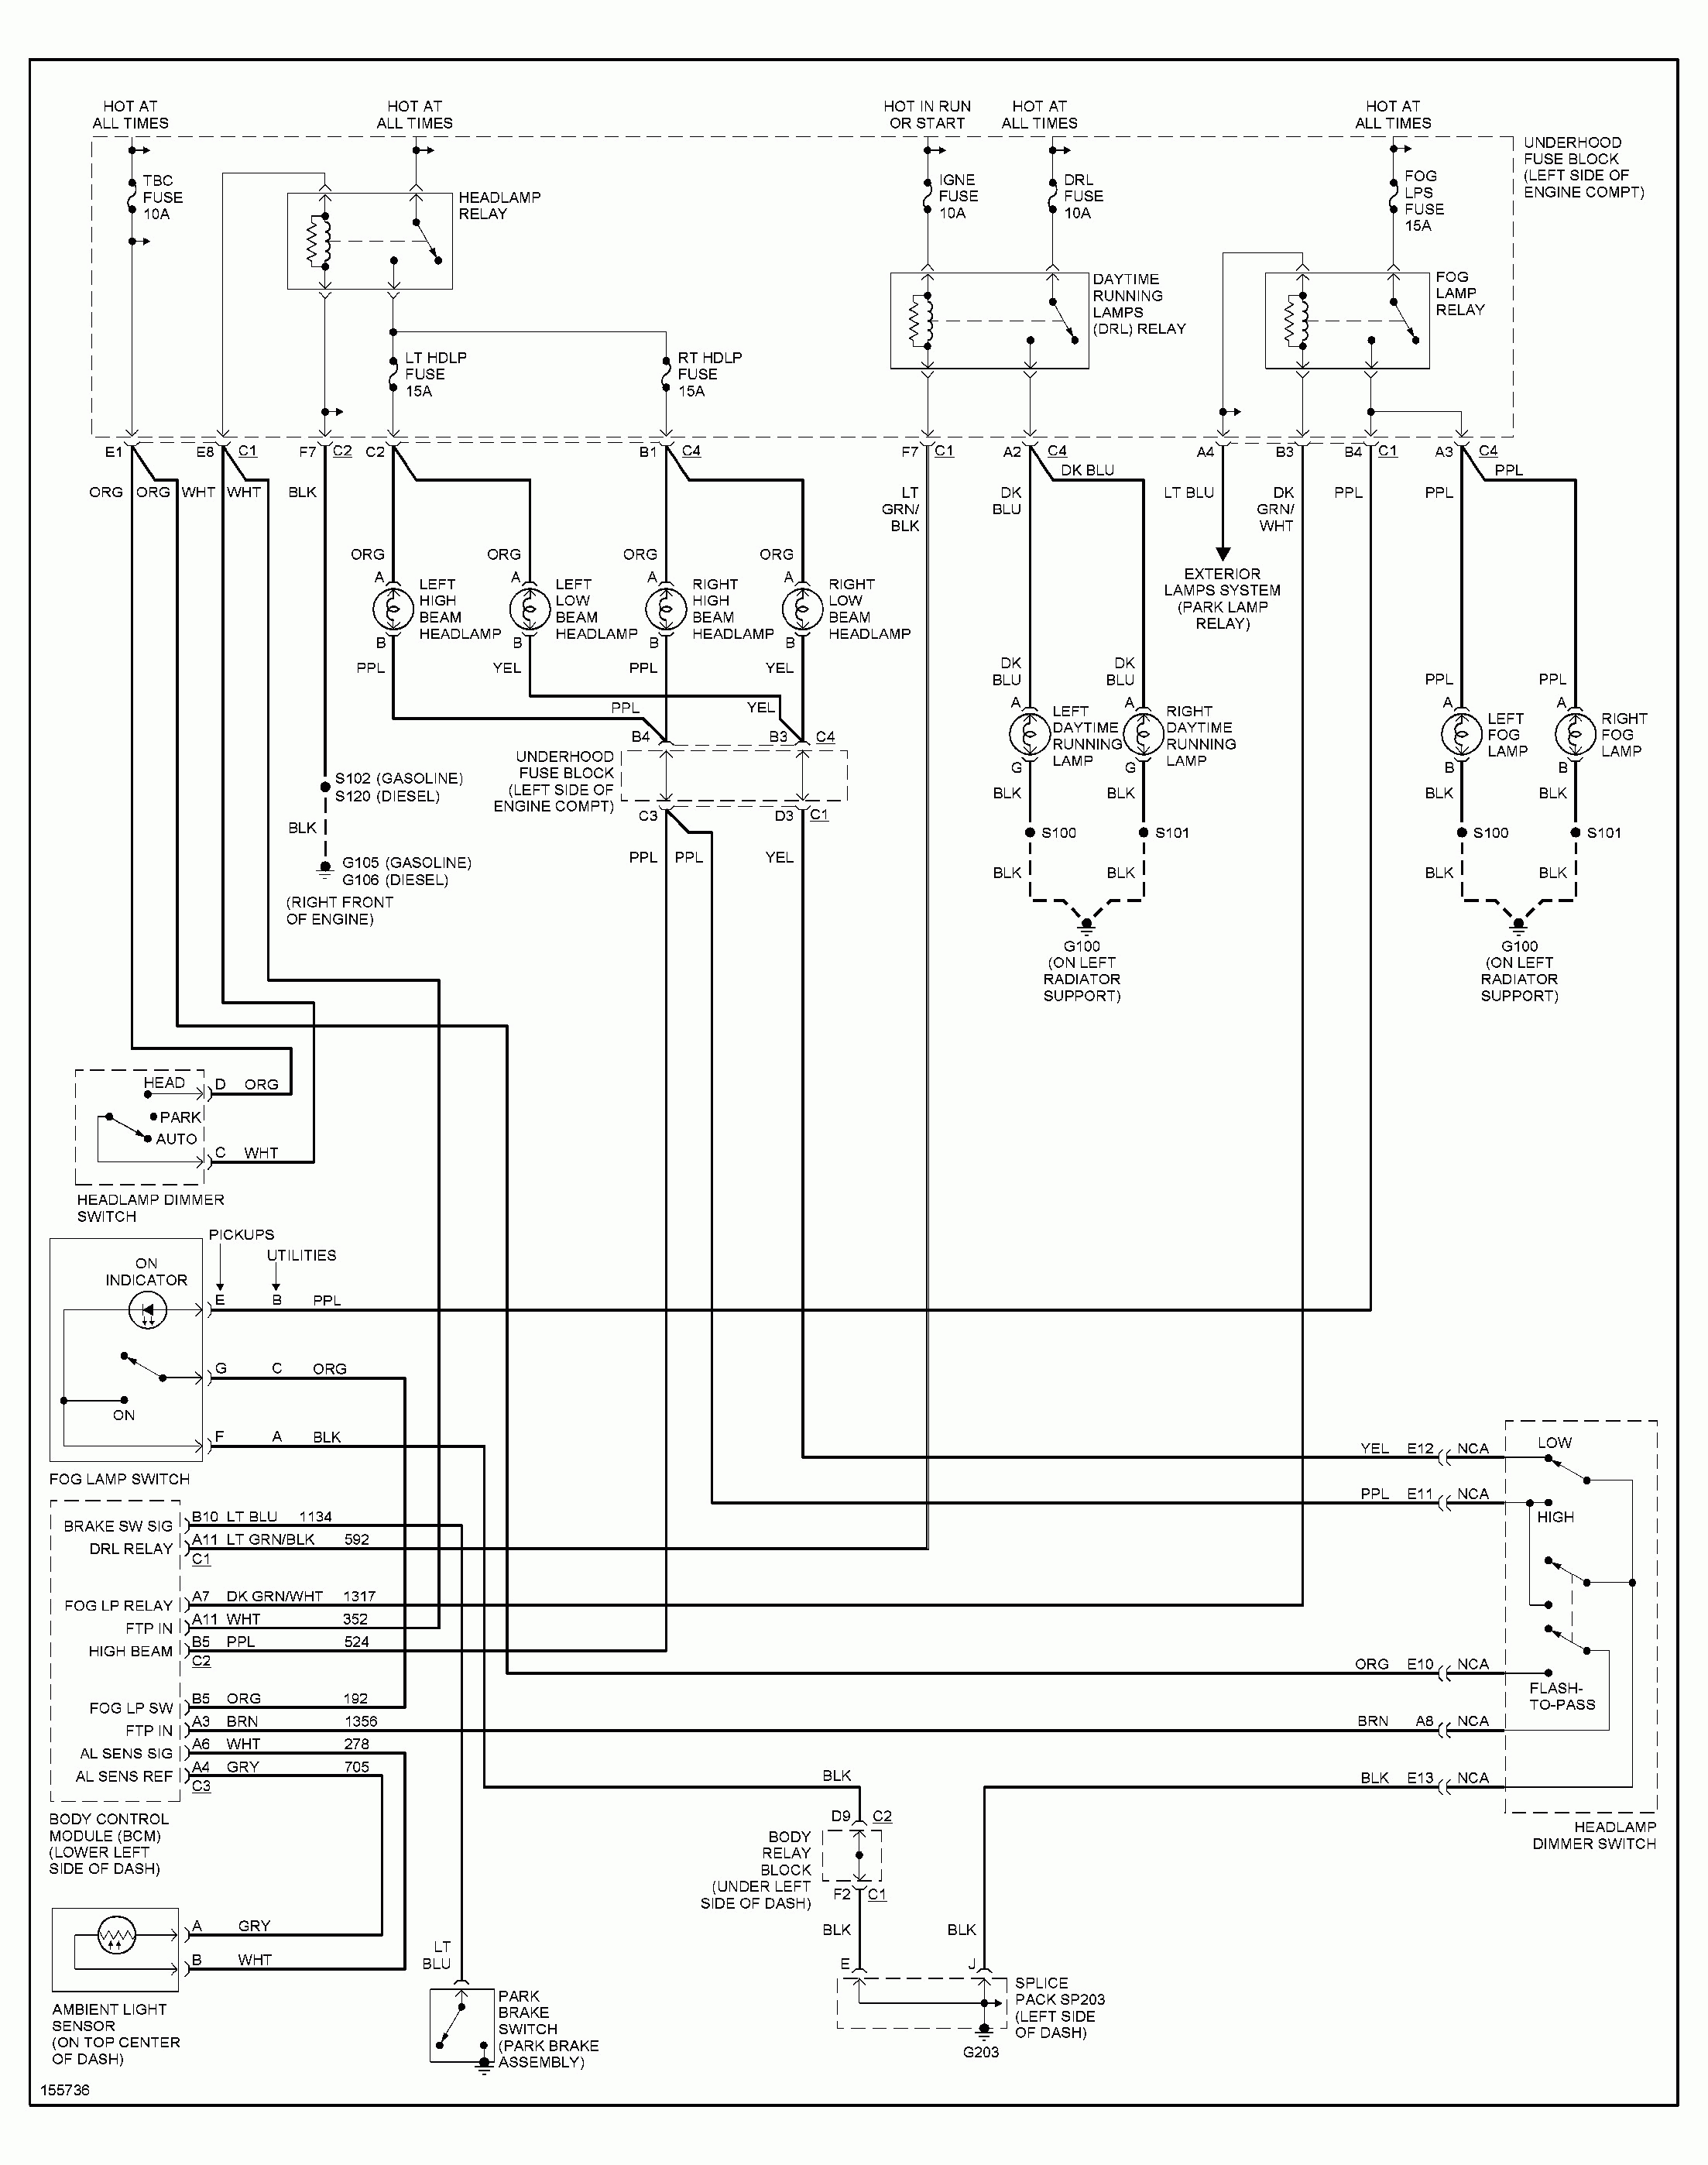 Minute Mount 2 Wiring Harness - Wiring Diagram Data - Fisher Plow Wiring Diagram Minute Mount 2